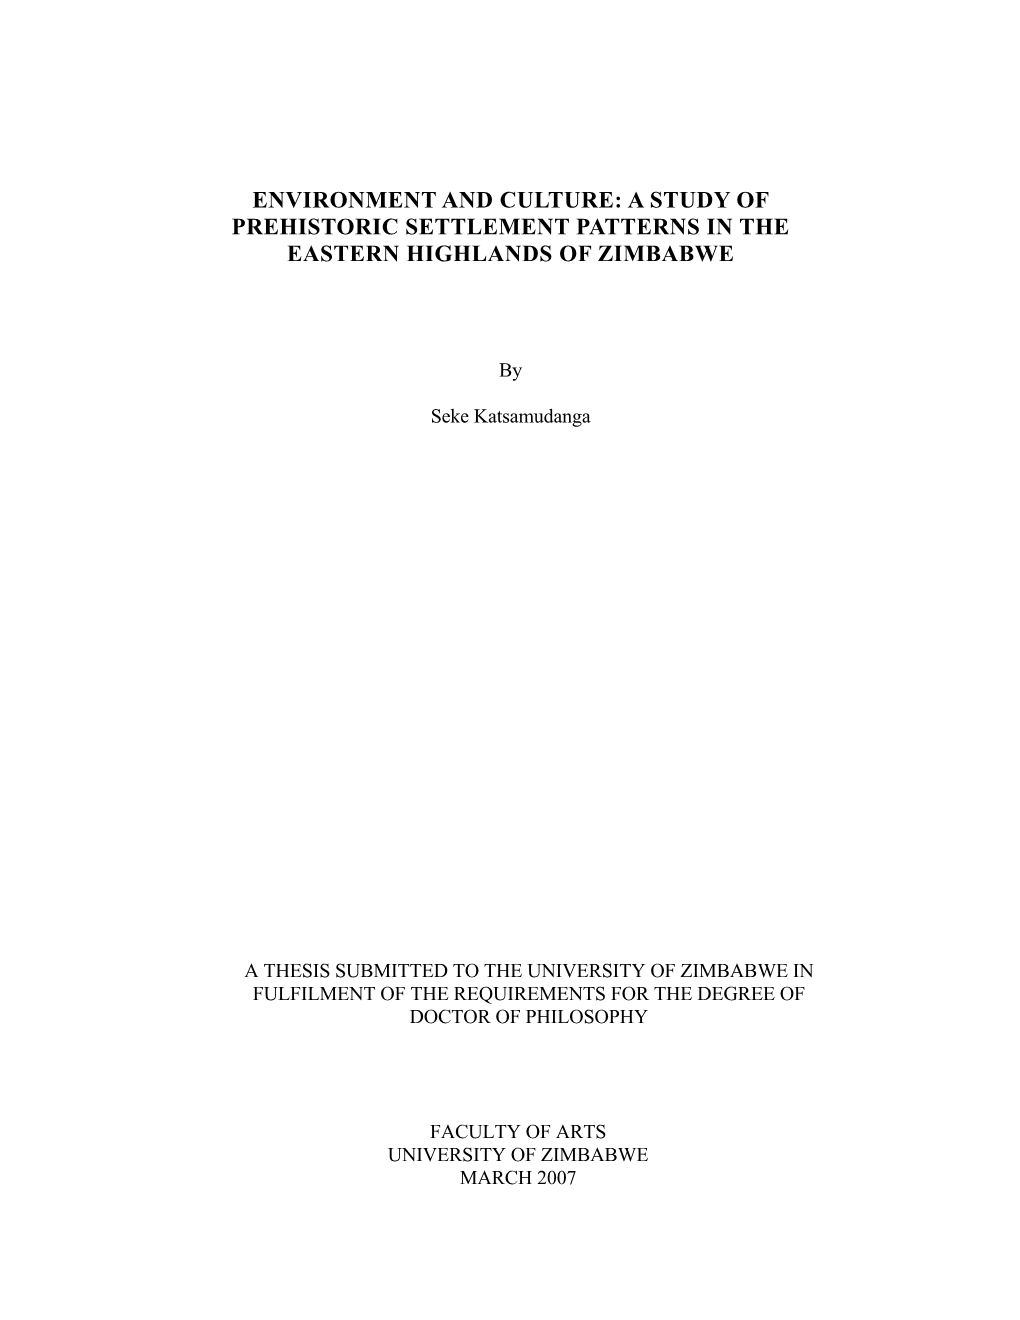 Environment and Culture: a Study of Prehistoric Settlement Patterns in the Eastern Highlands of Zimbabwe